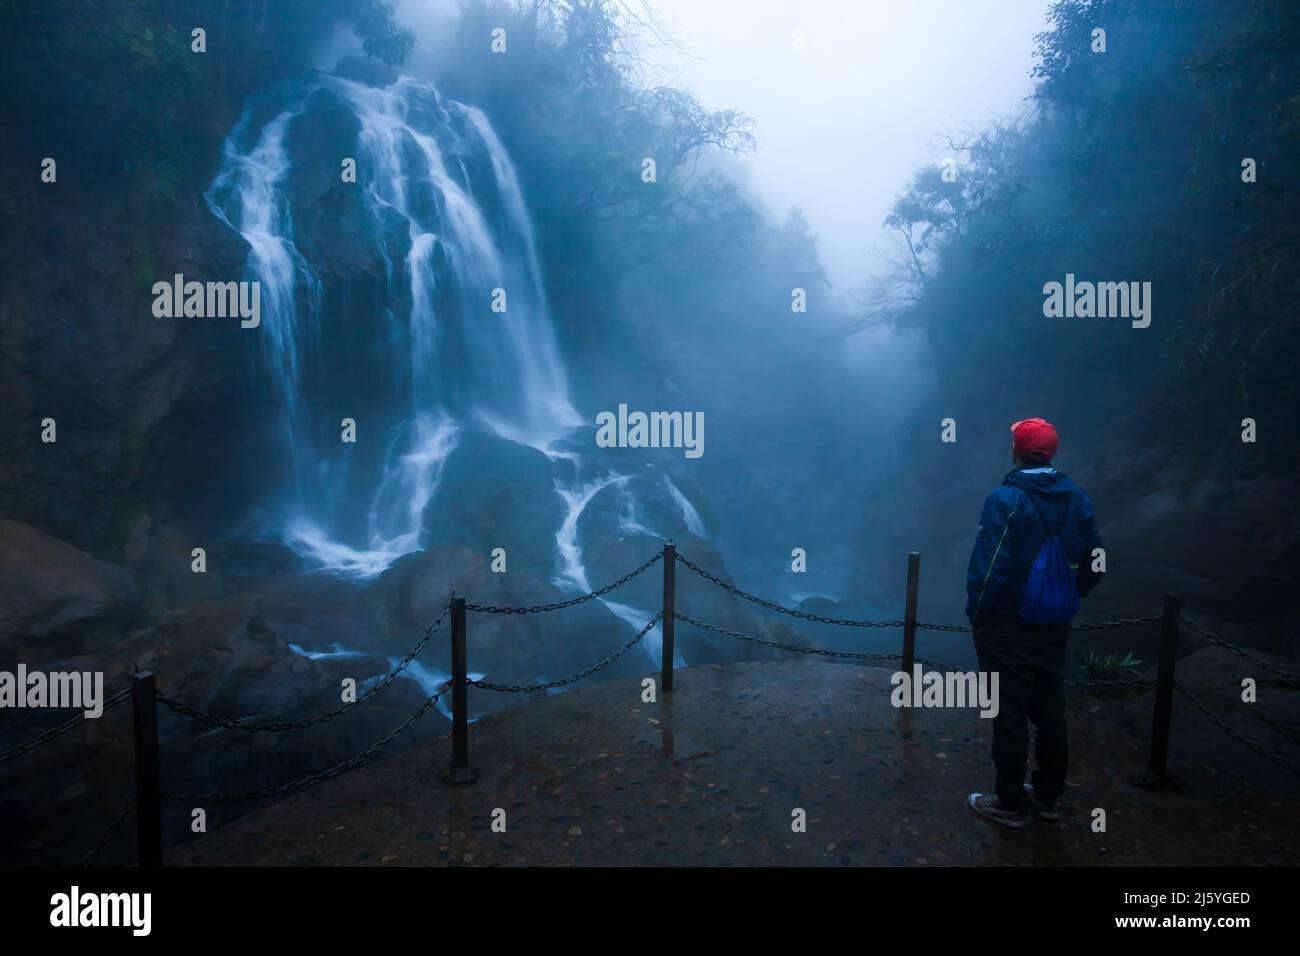 A tourist man wearing a red hat stands in front of a tropical waterfall in foggy, a tourist attraction in Sapa, Vietnam. Long exposure. Stock Photo